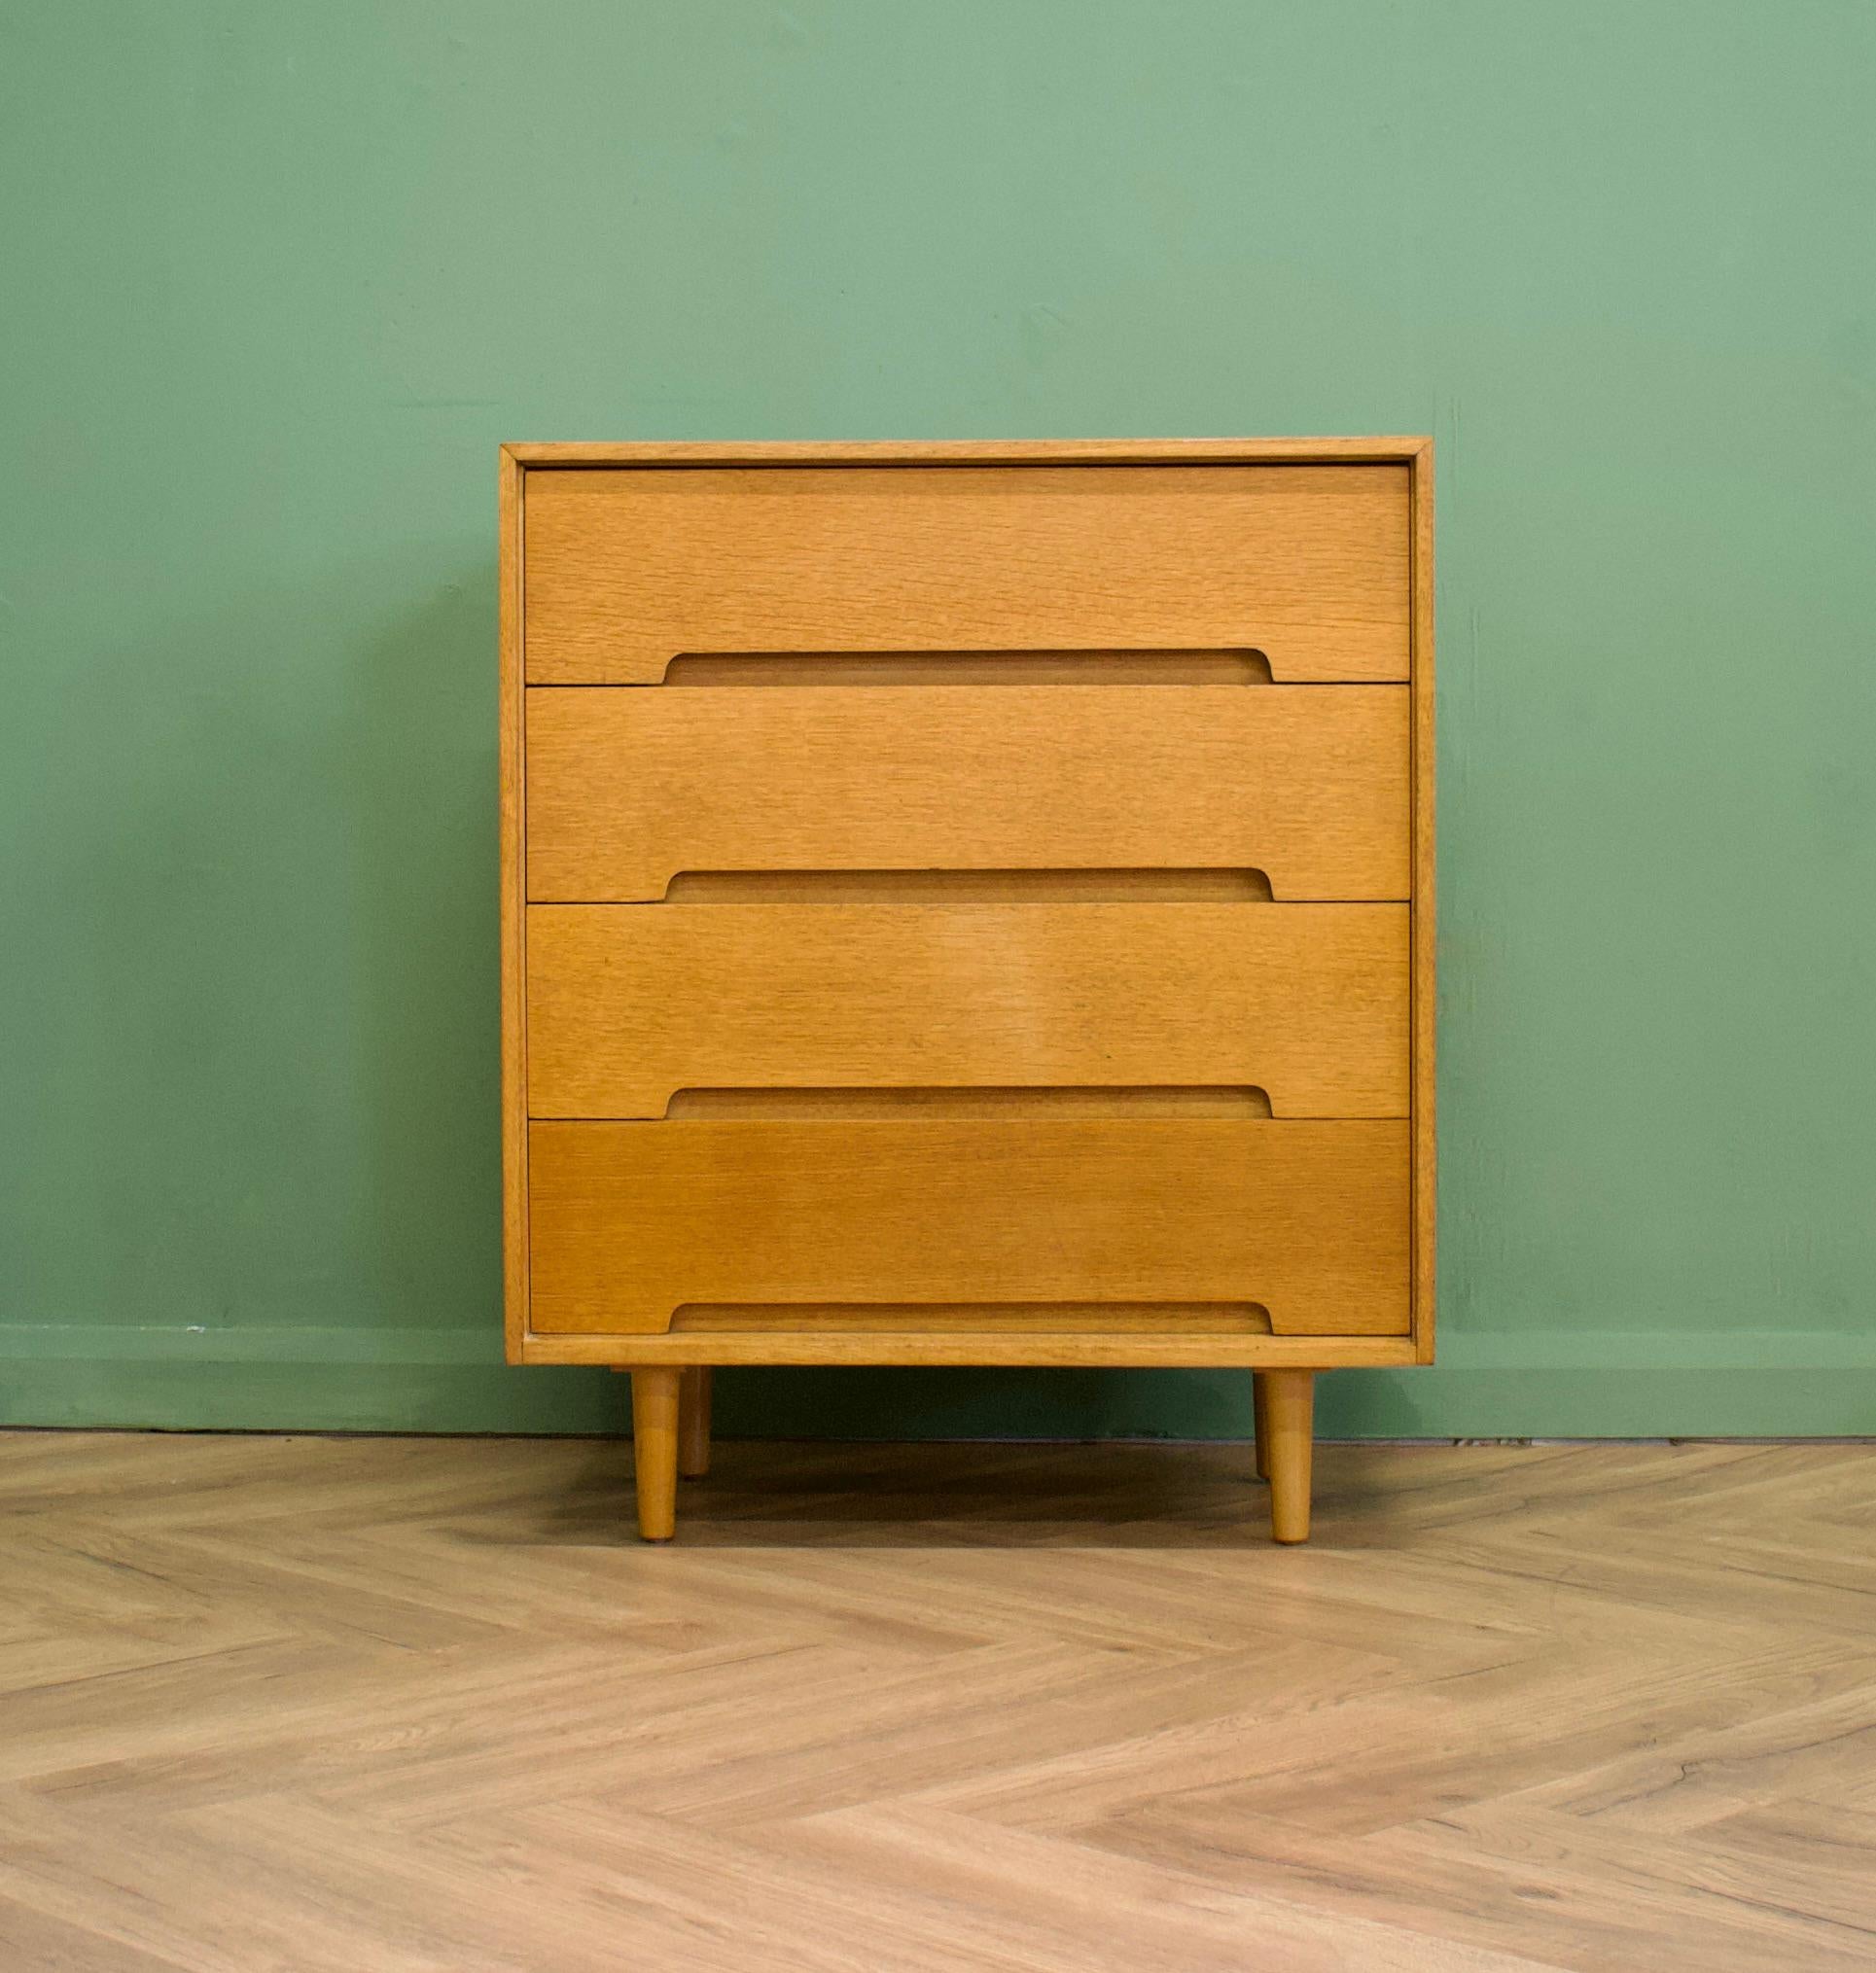 A midcentury oak chest of drawers designed by John & Sylvia Reid for Stag
From the 'C' range.
Featuring 4 drawers.